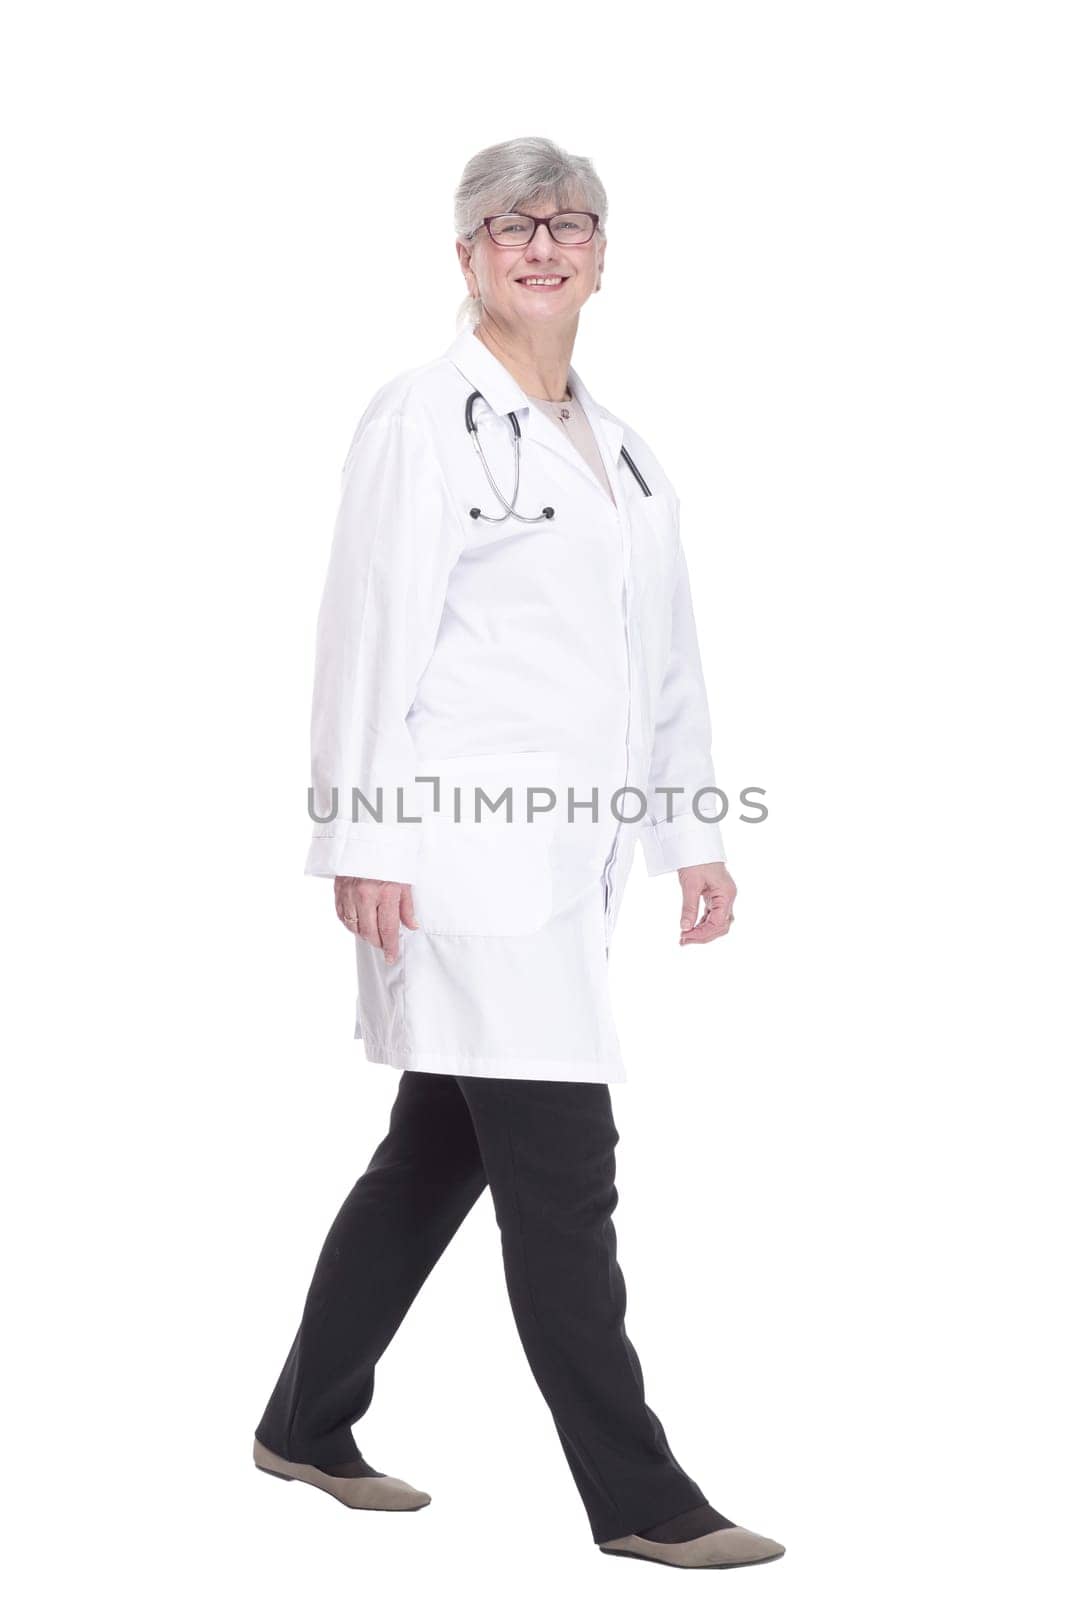 happy woman doctor striding forward. isolated on a white background. by asdf